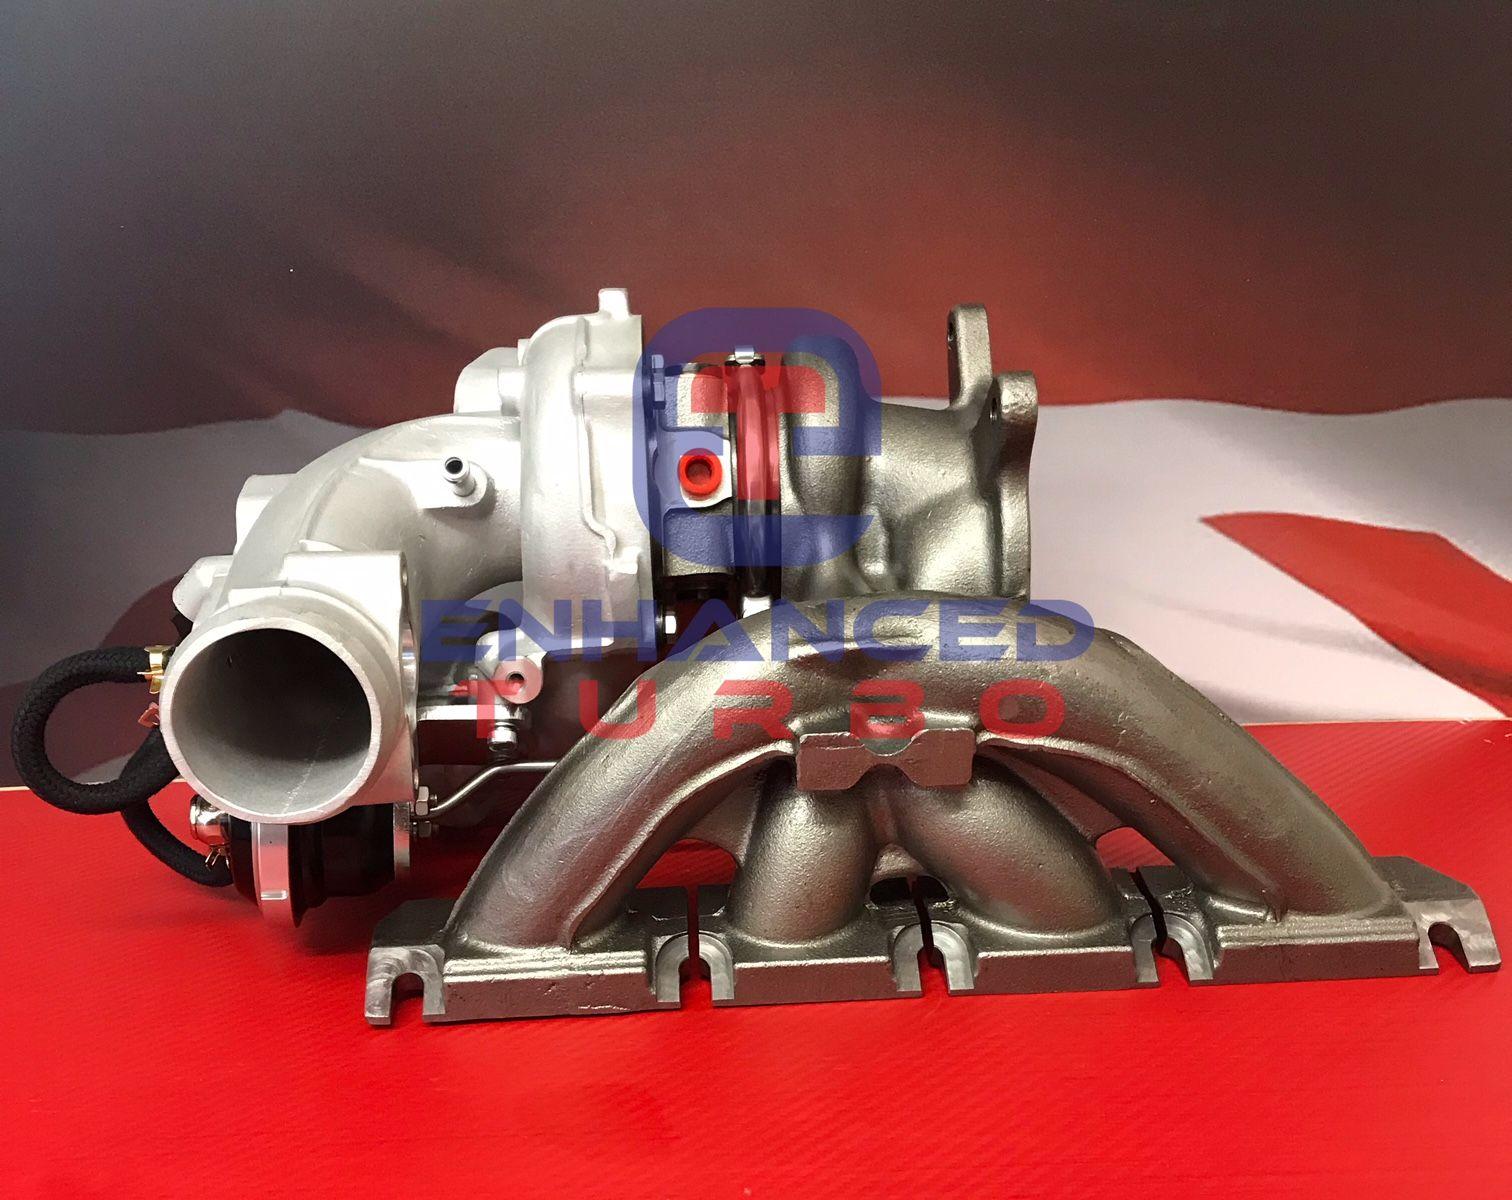 TURBOSMART TURBOCHARGERS ARE HERE, WE HAVE ALL YOUR BOOST! • Turbosmart